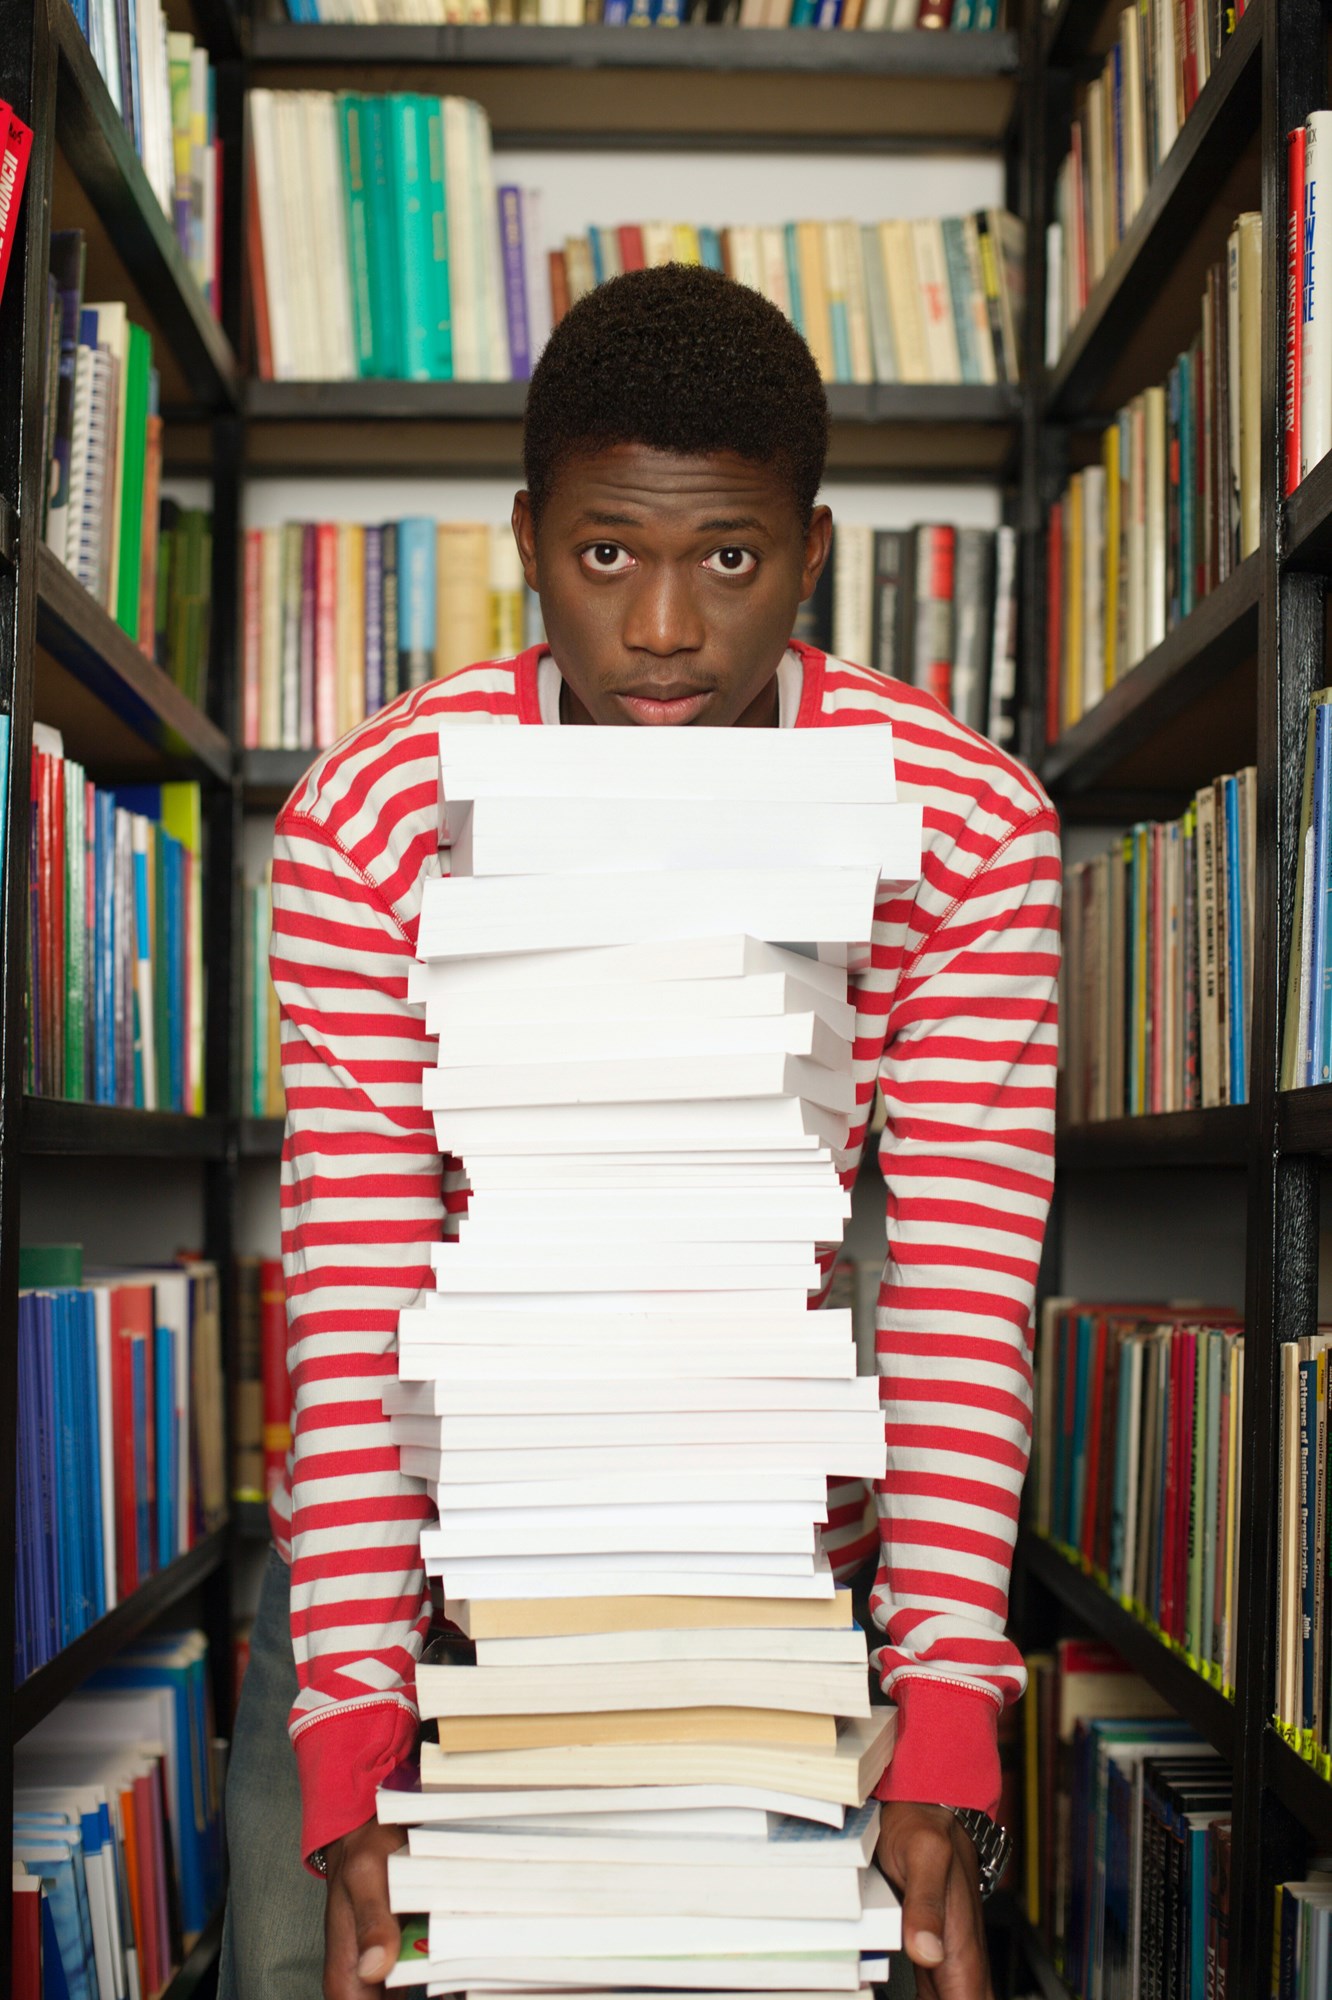 A person wearing a red and white shirt is standing among bookshelves, looking at the camera, and holding a large stack of books